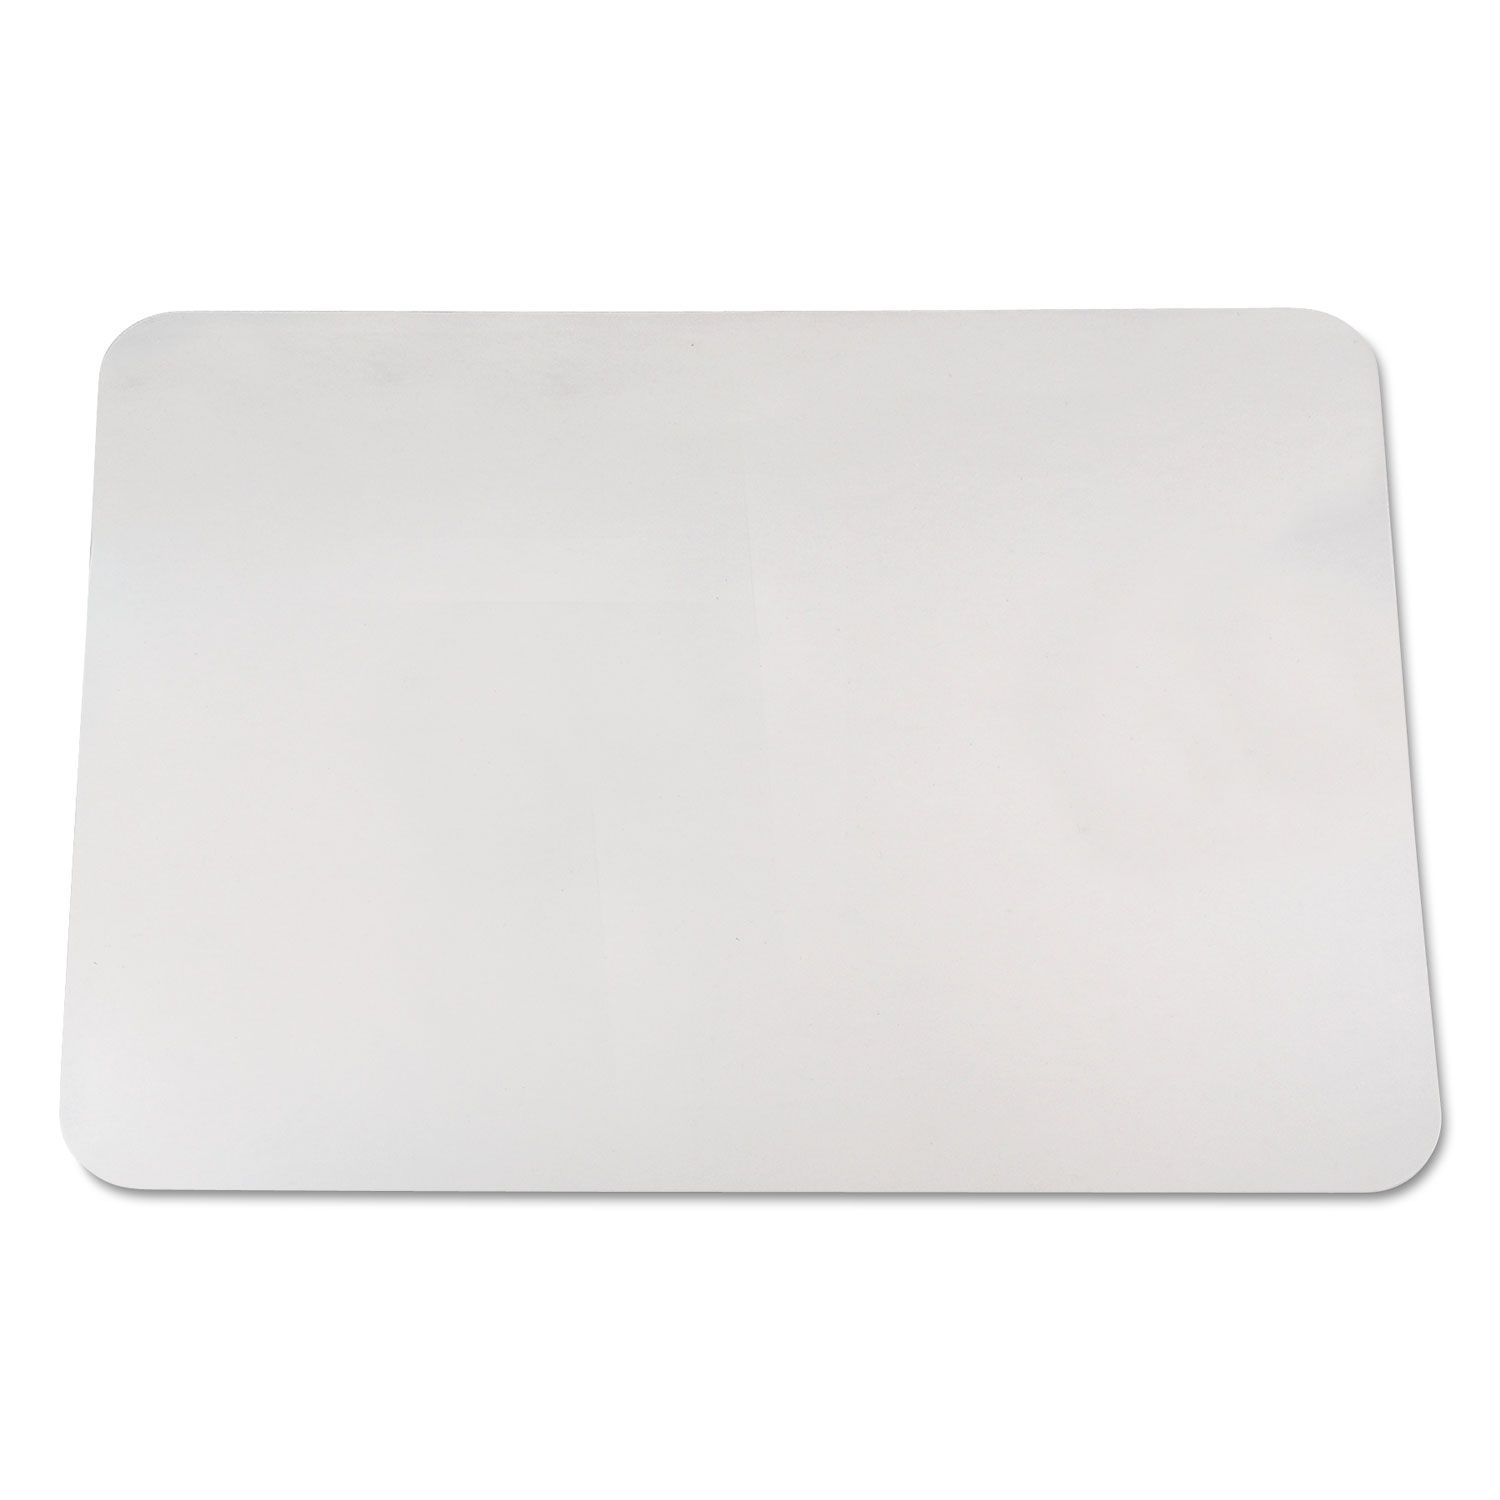 Krystalview Desk Pad With Microban By Artistic Aop6040ms